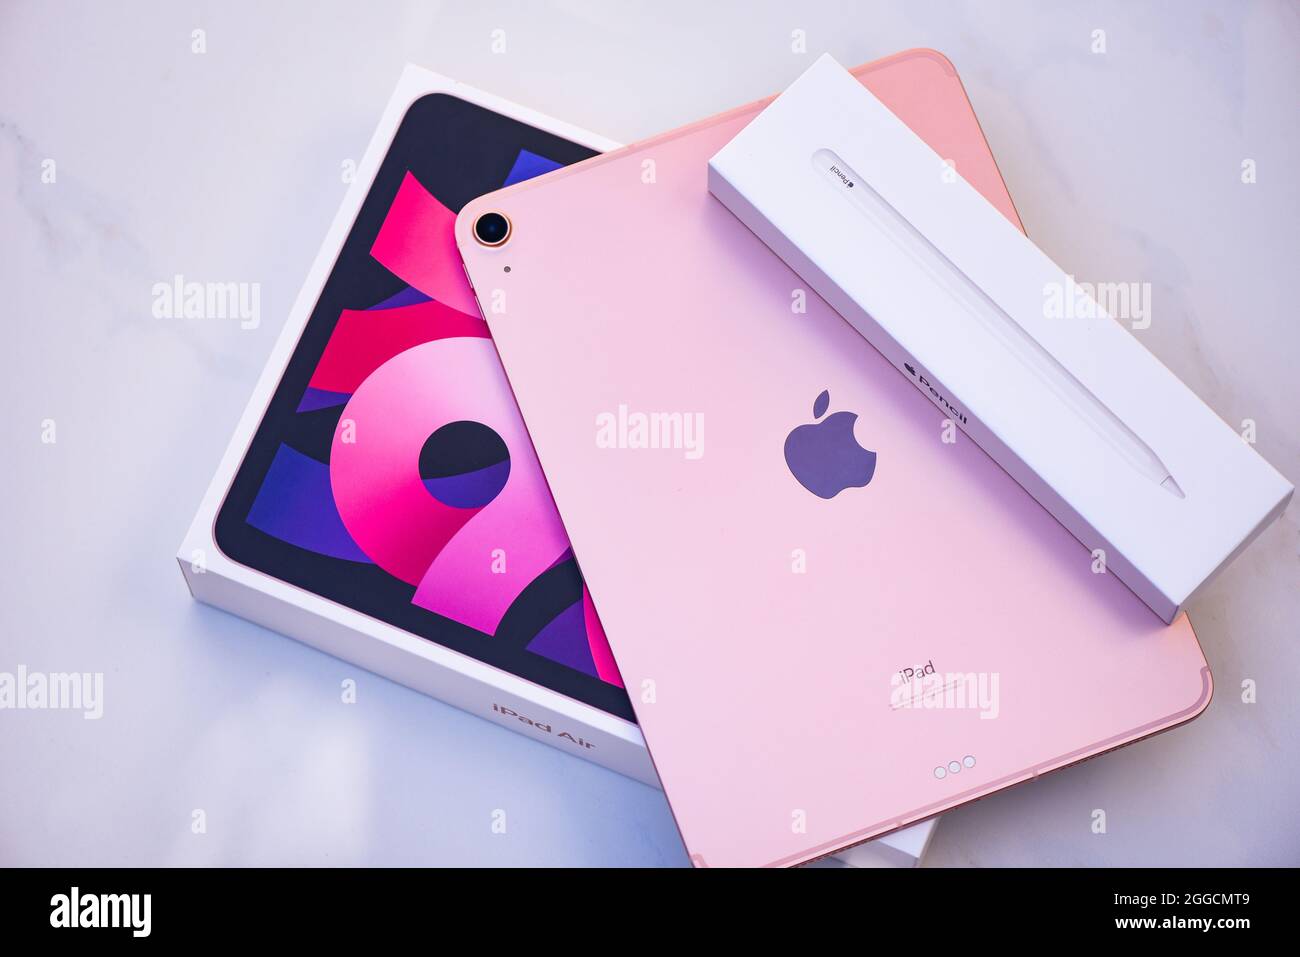 Bangkok, Thailand - August 21, 2021: New Apple iPad rose gold color, rear  view logo Apple launch Tablet iPad Air 2020-2021 (4th Gen.) with box and  app Stock Photo - Alamy